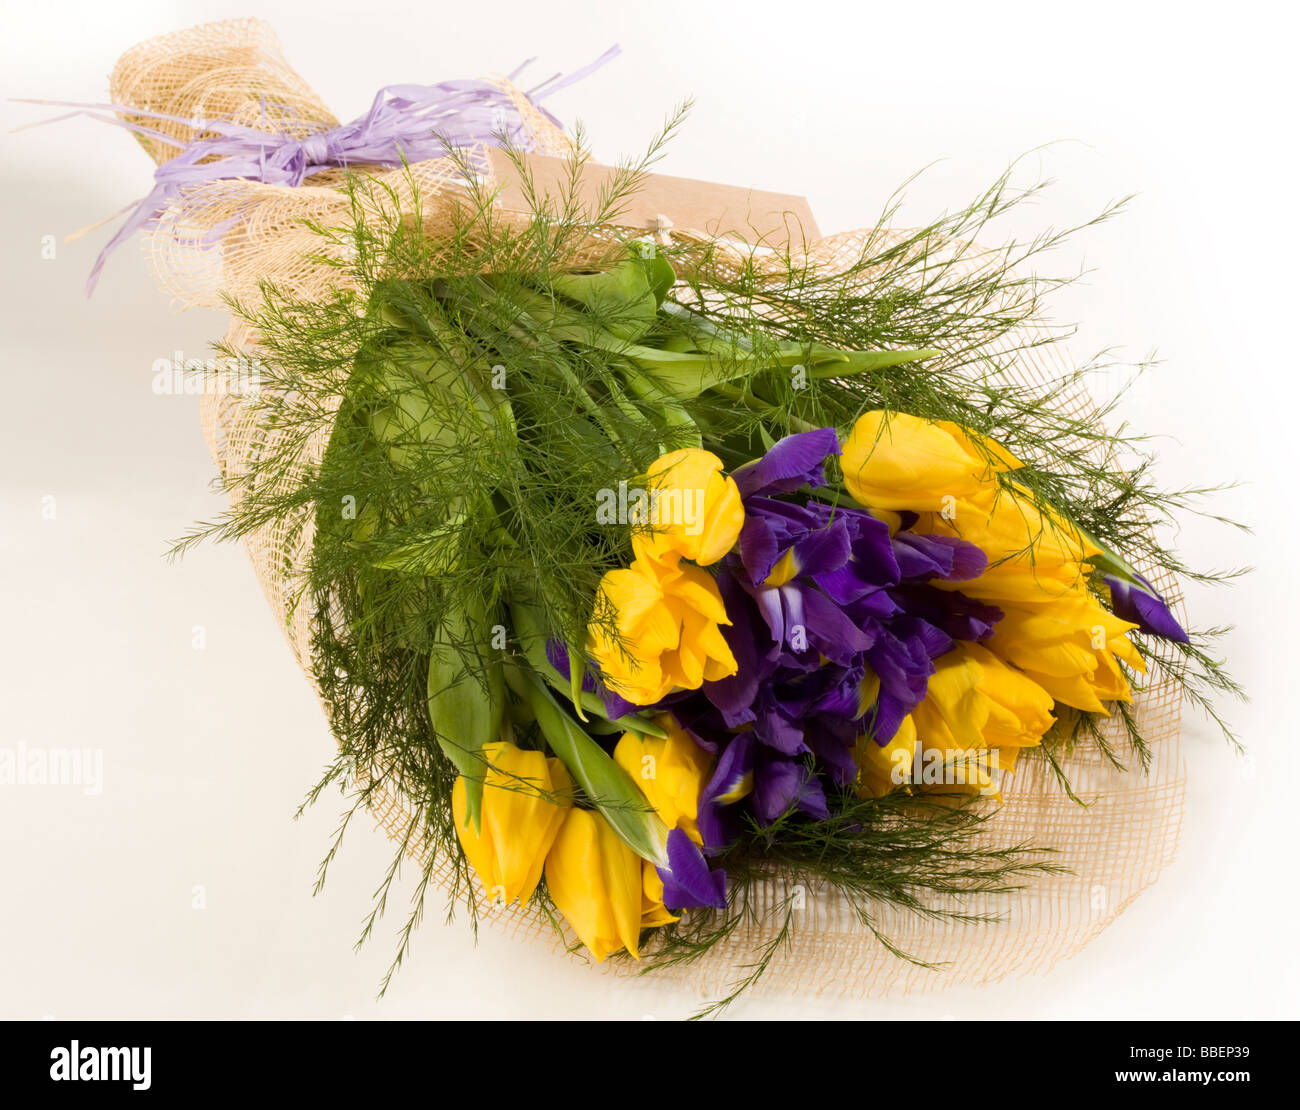 Bouquet of freshly cut flowers Stock Photo